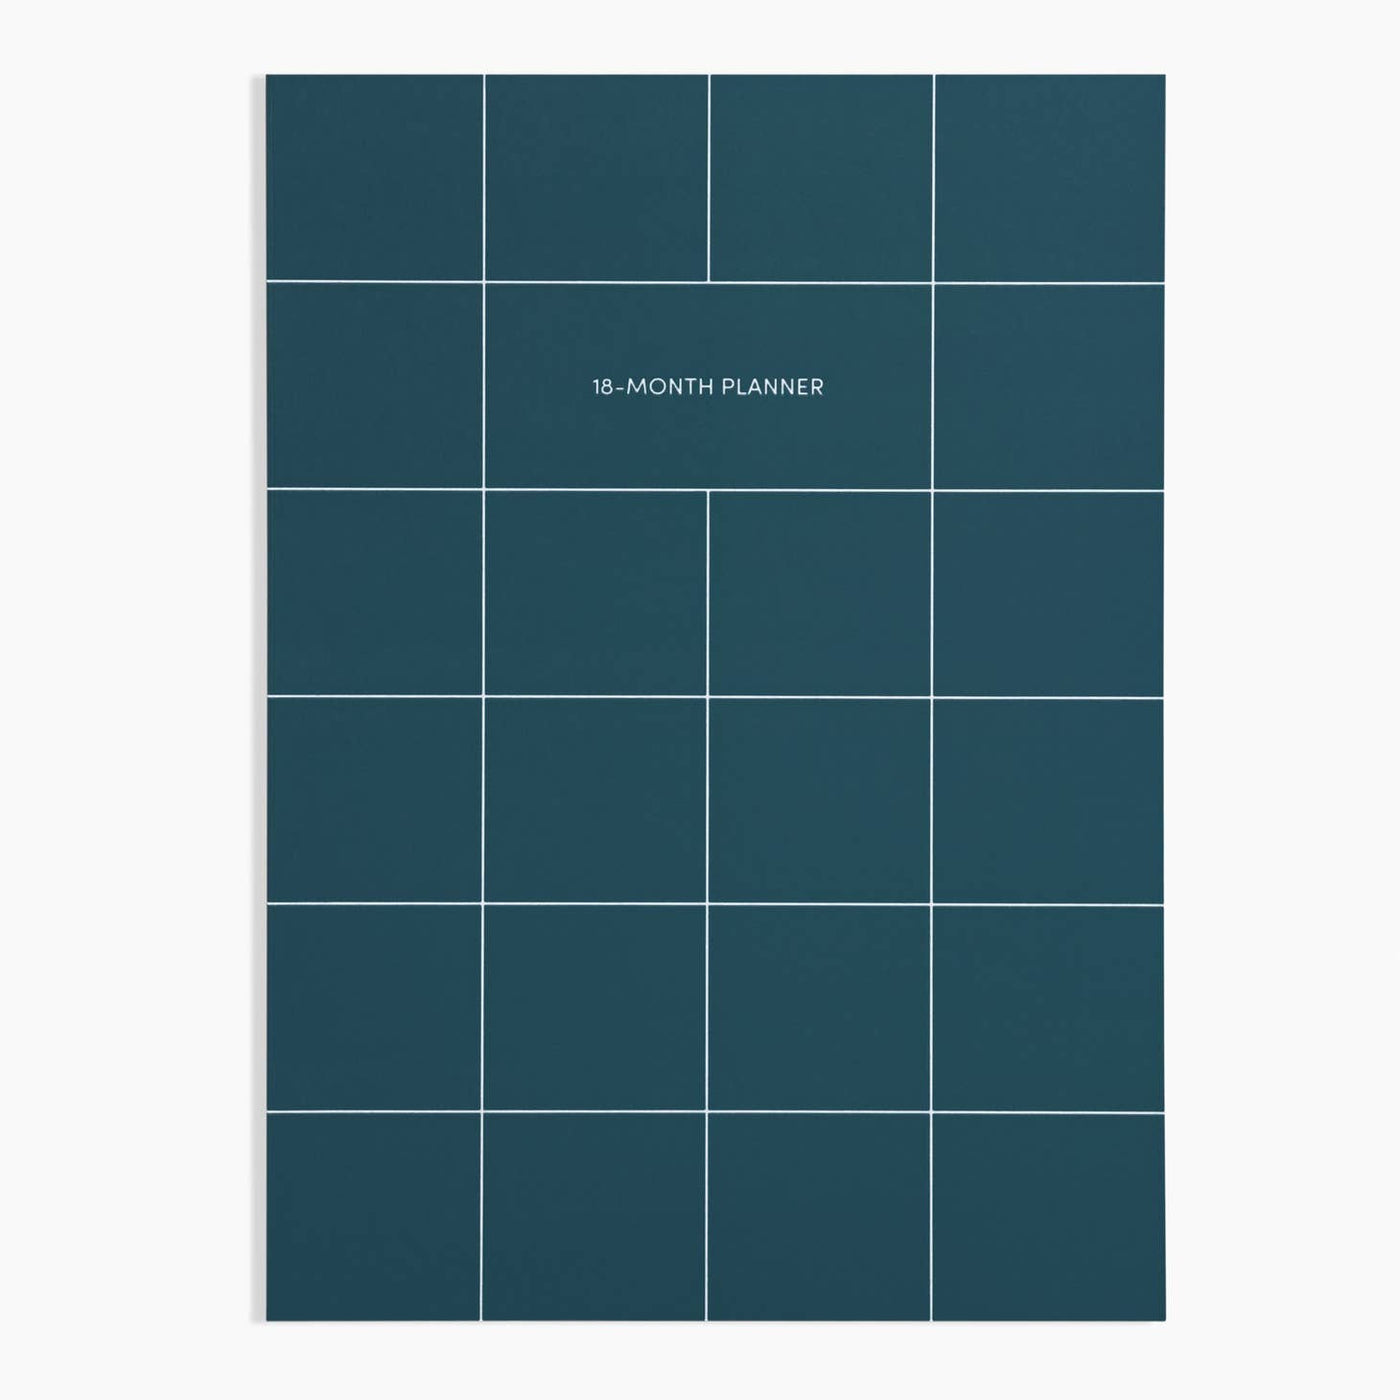 18-month planner front cover showing a white grid on a dark teal background